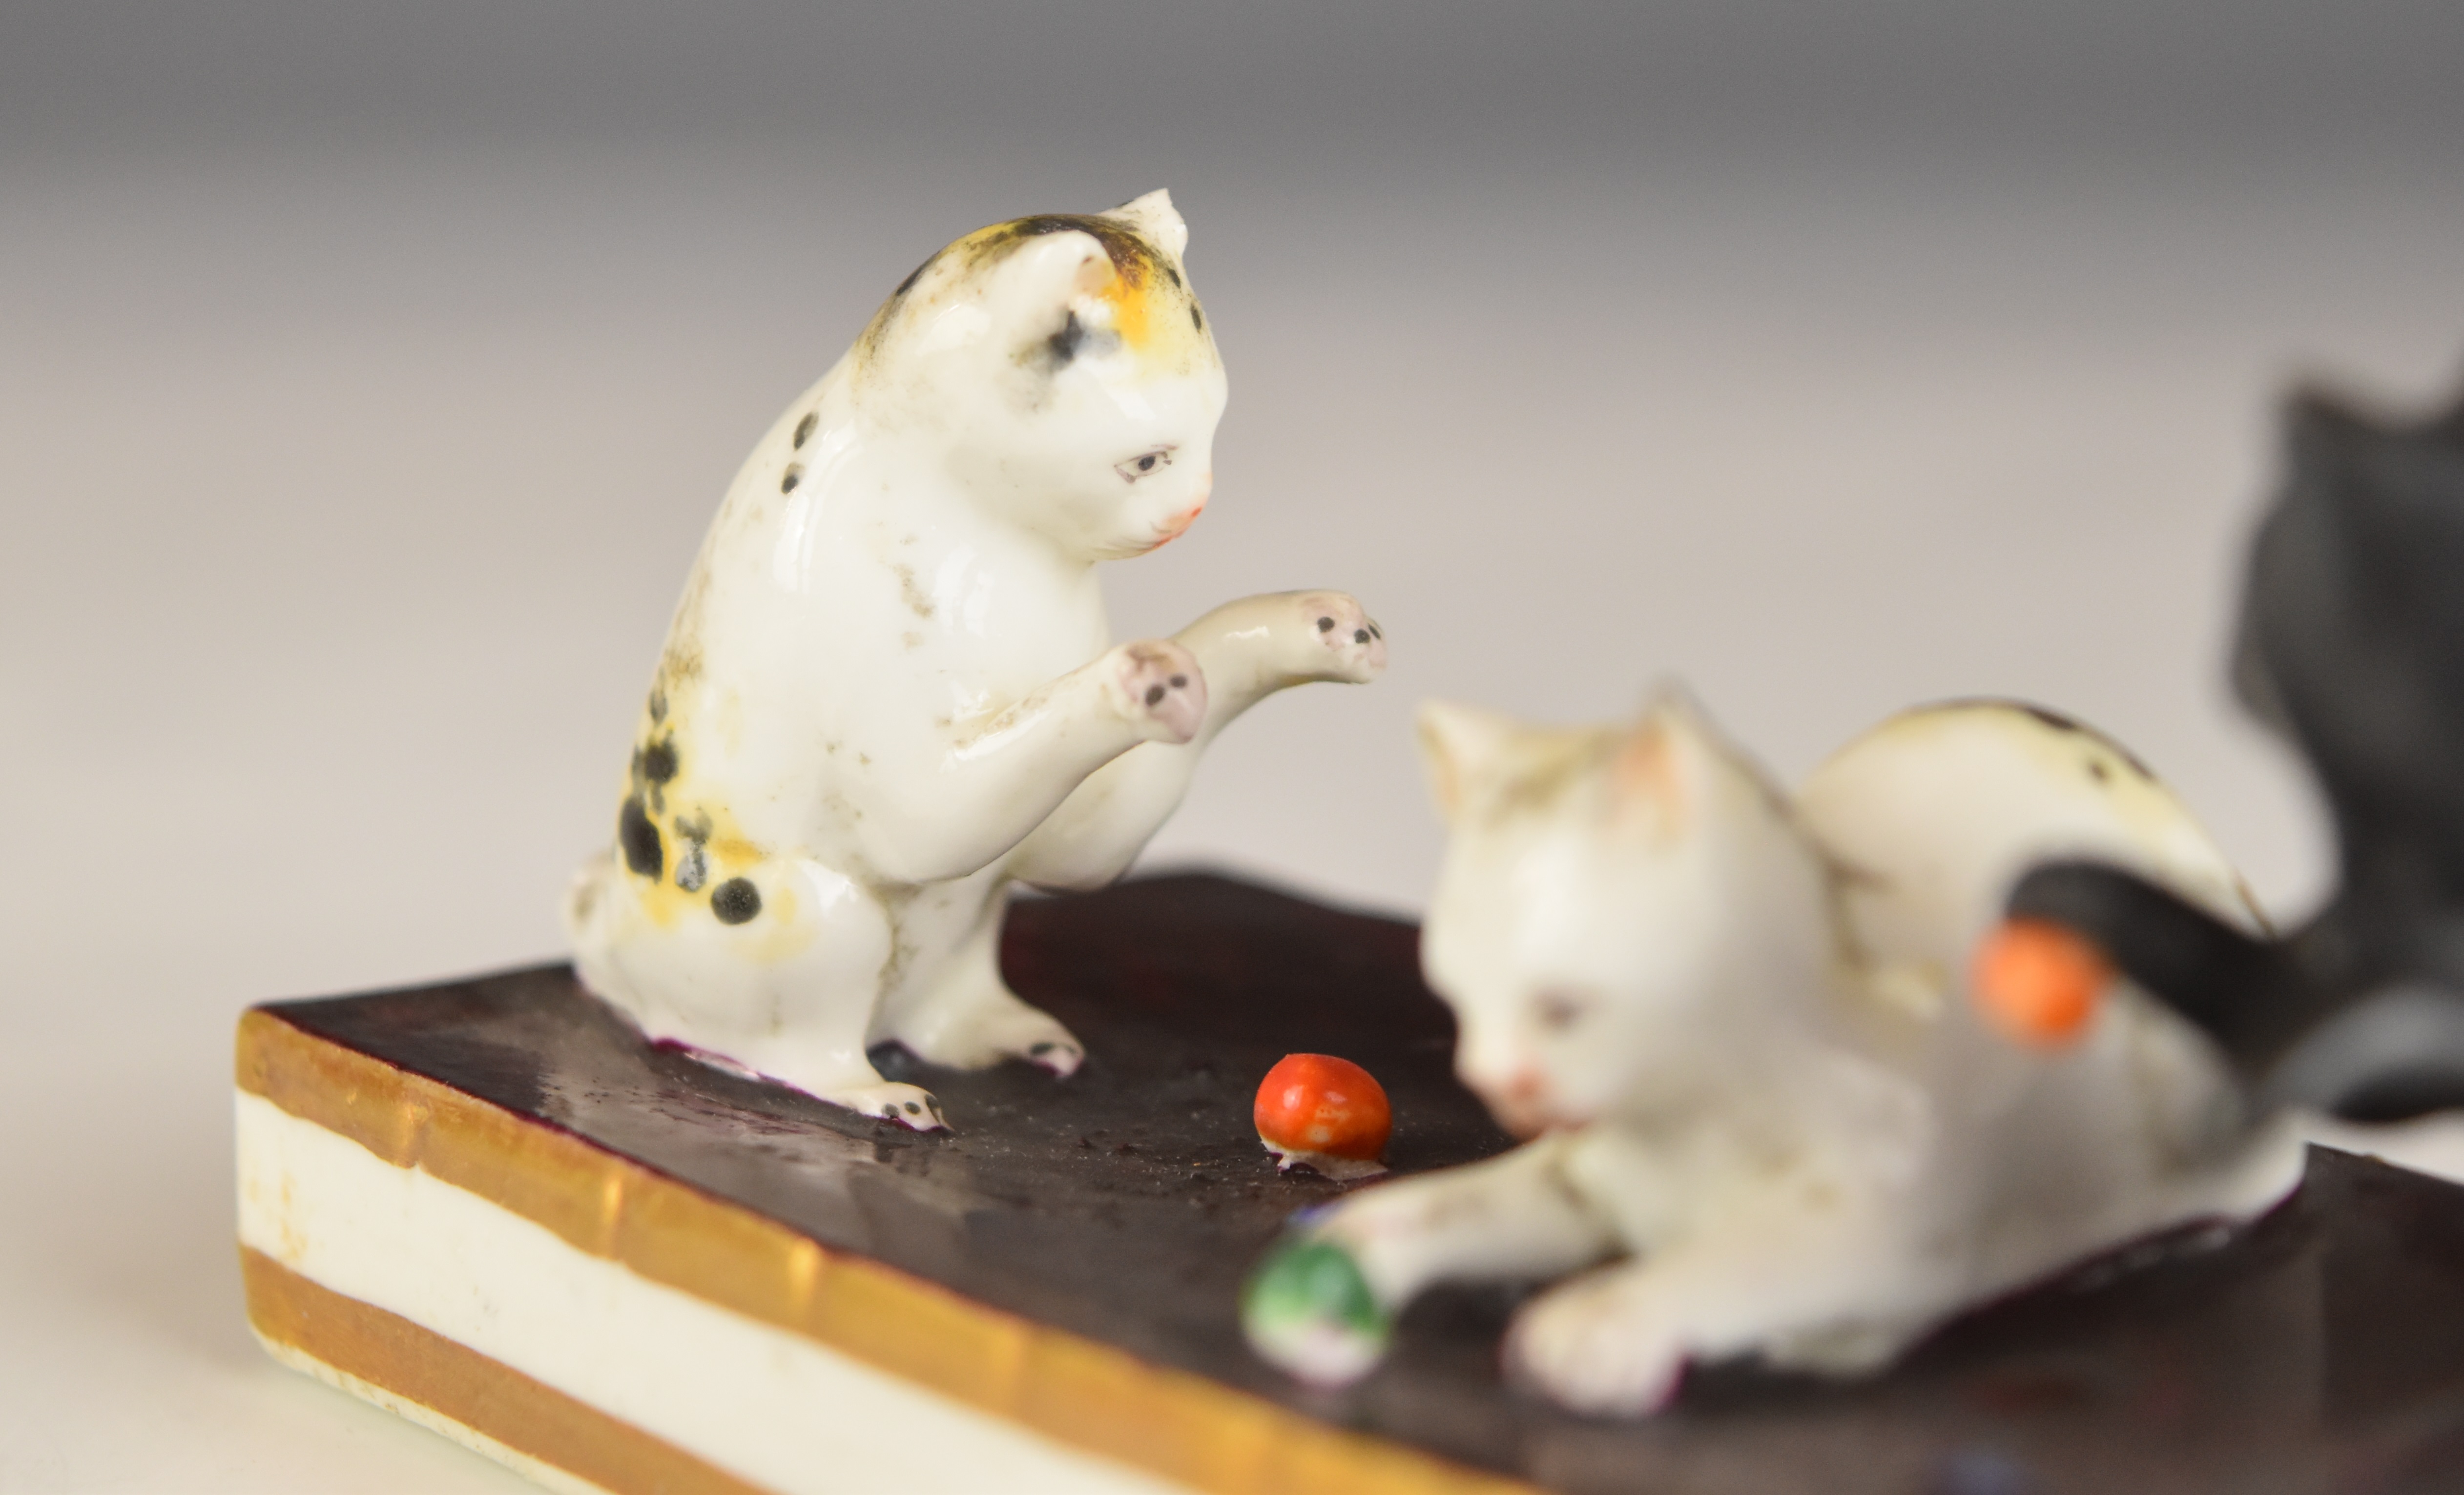 19thC novelty miniature porcelain tableau of three kittens playing, W10 x D4.5 x H4.5cm - Image 4 of 8